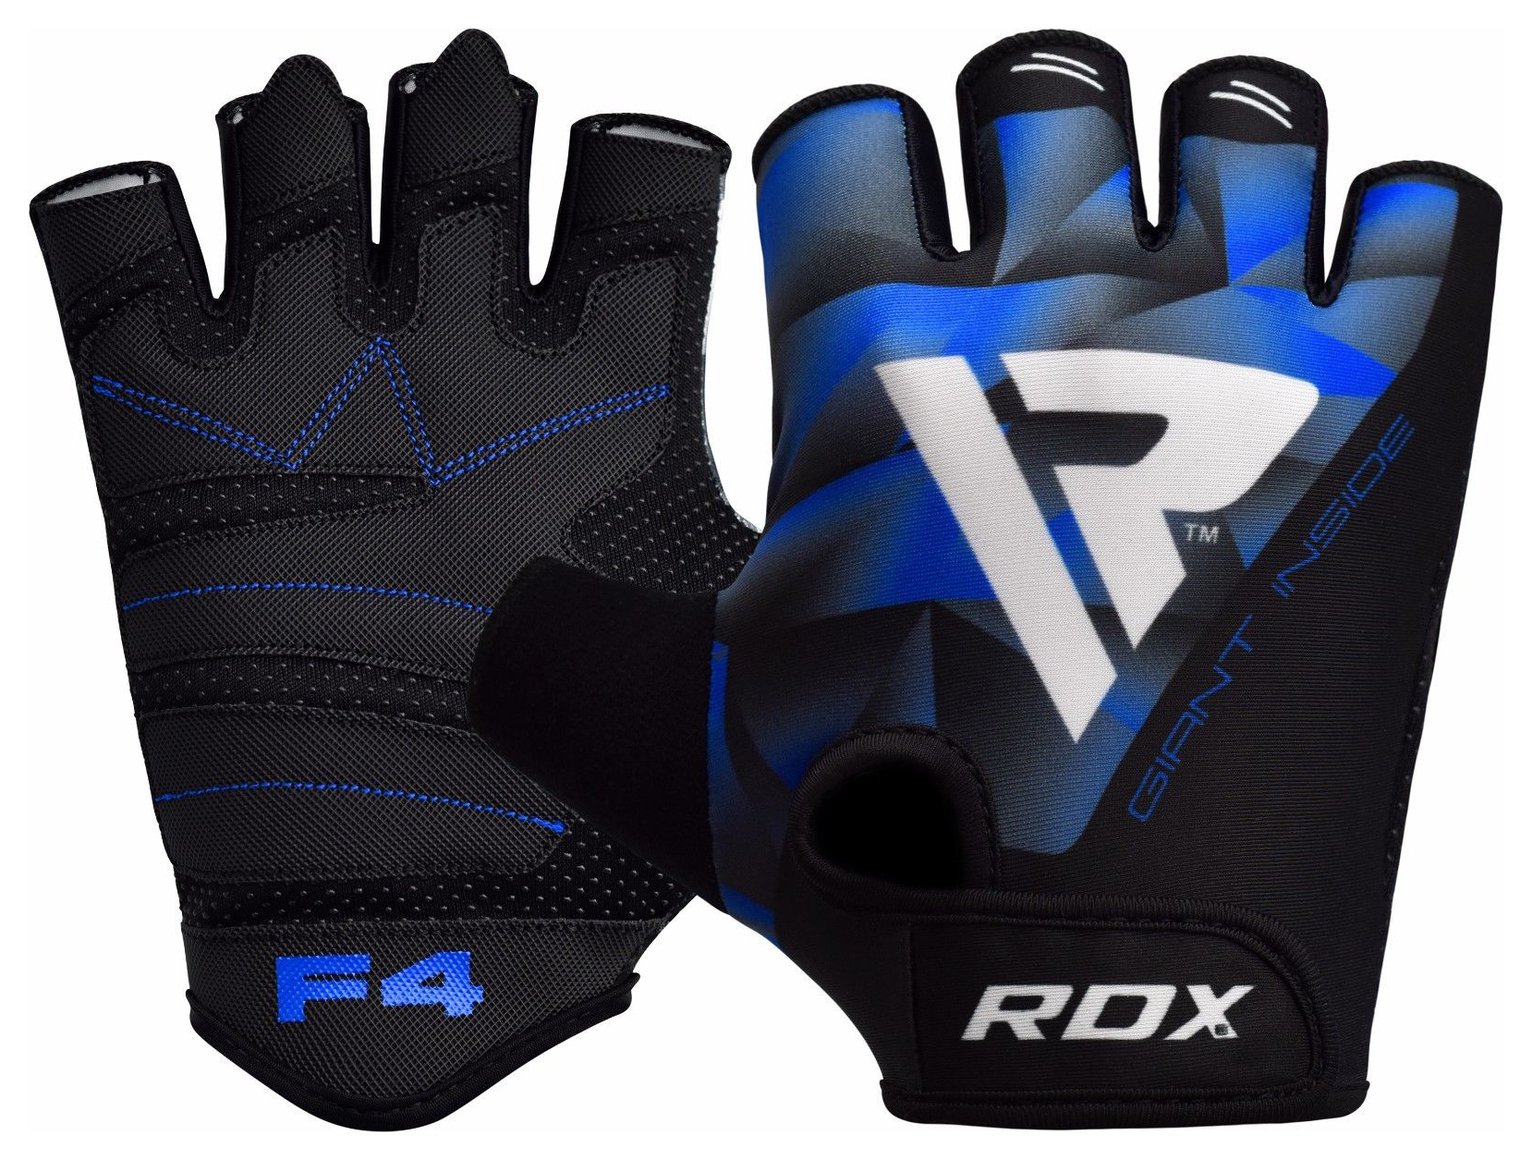 RDX Medium/Large Weight Lifting Gloves review